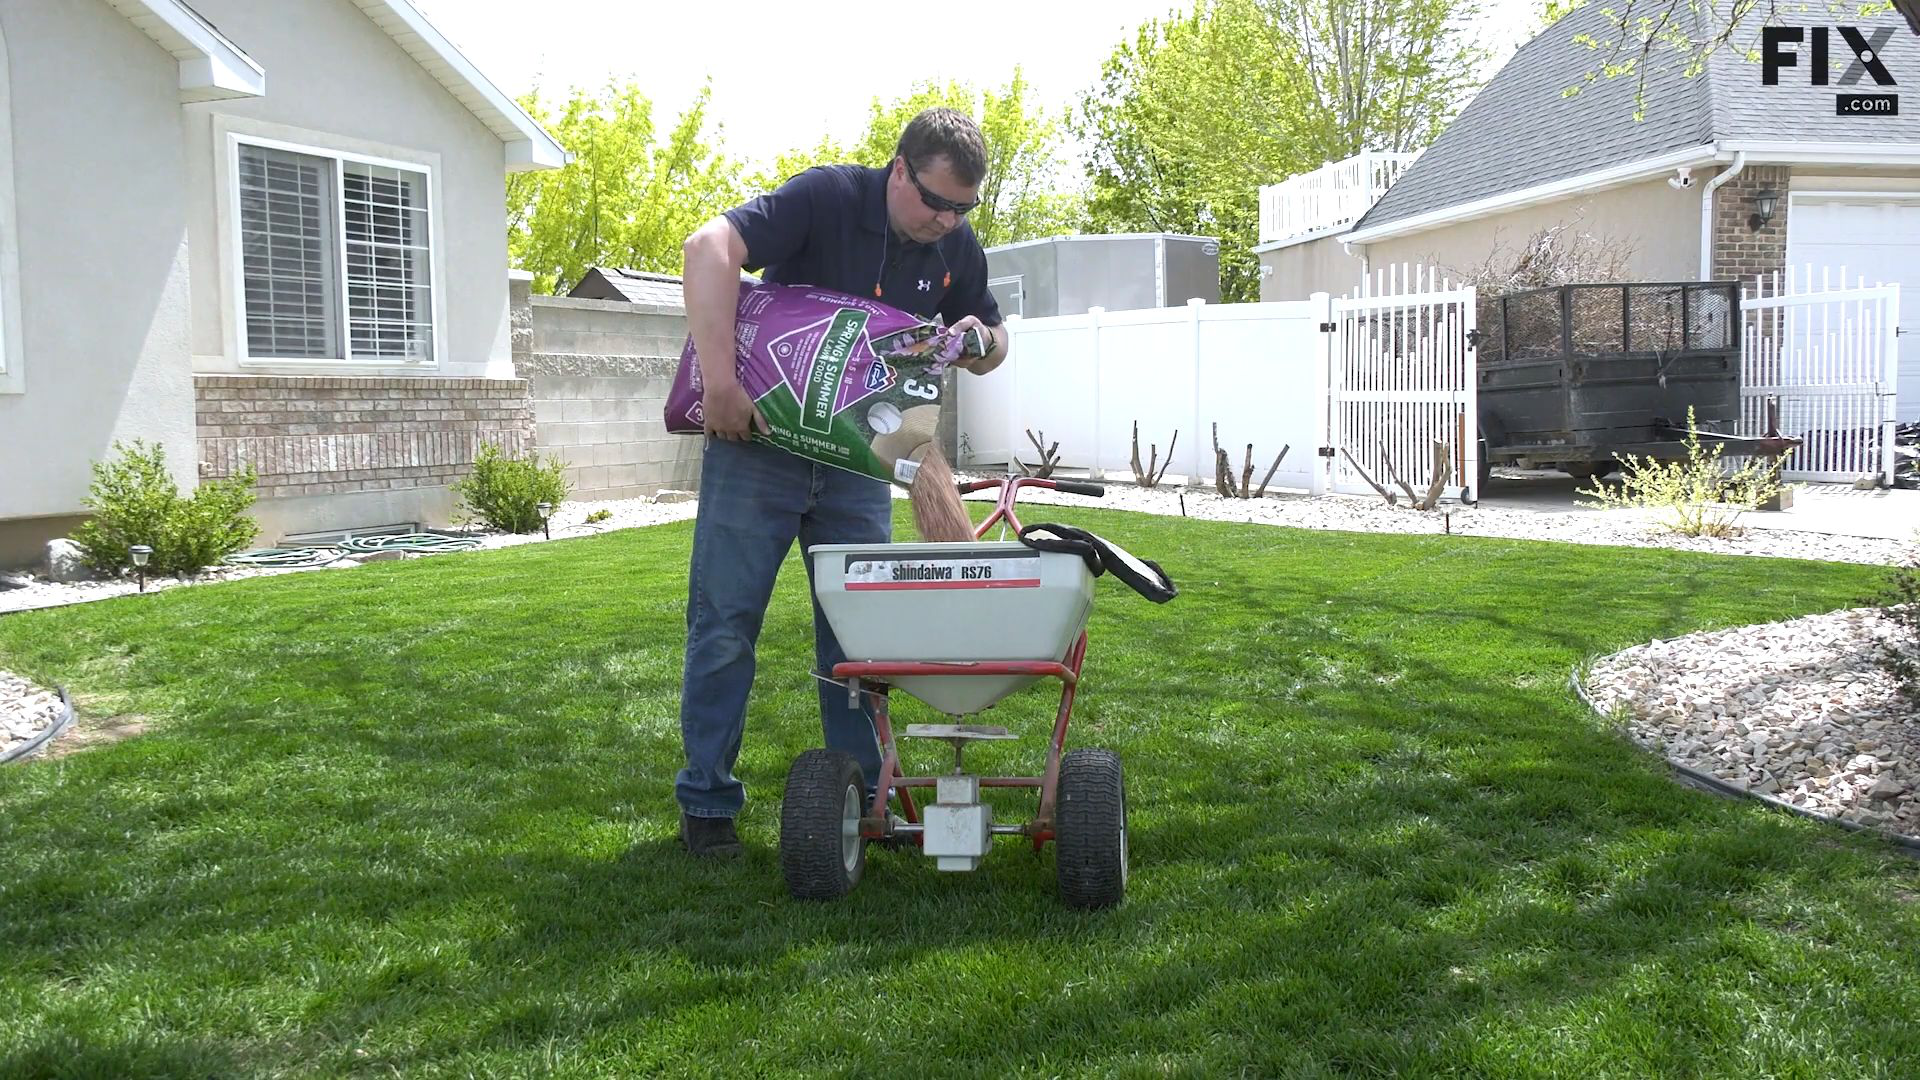 Repair technician standing on a front lawn while emptying a bag of lawn fertilizer to fill up a rotary fertilizer spreader